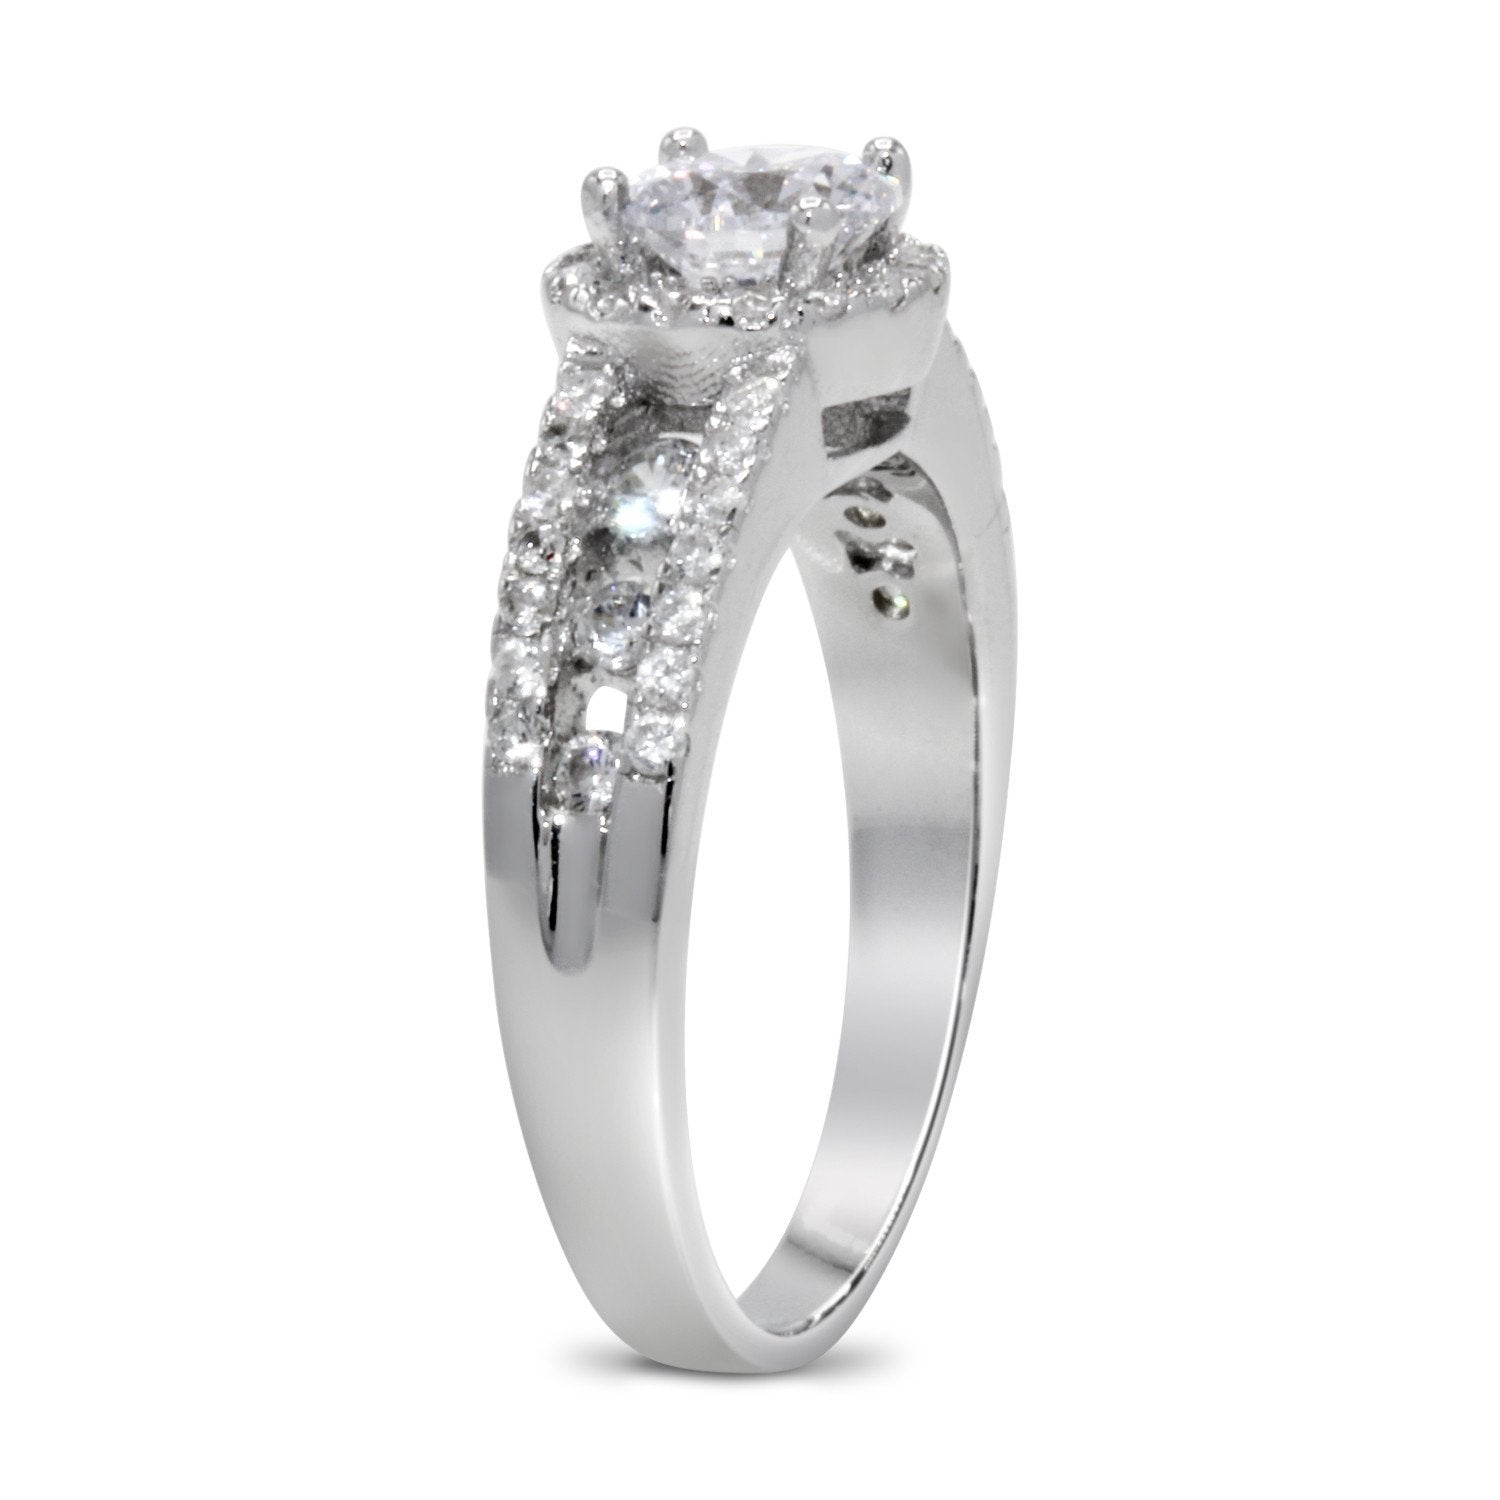 CZ 5mm Center Stone Sterling Silver Plated Crossover Halo Engagement Ring